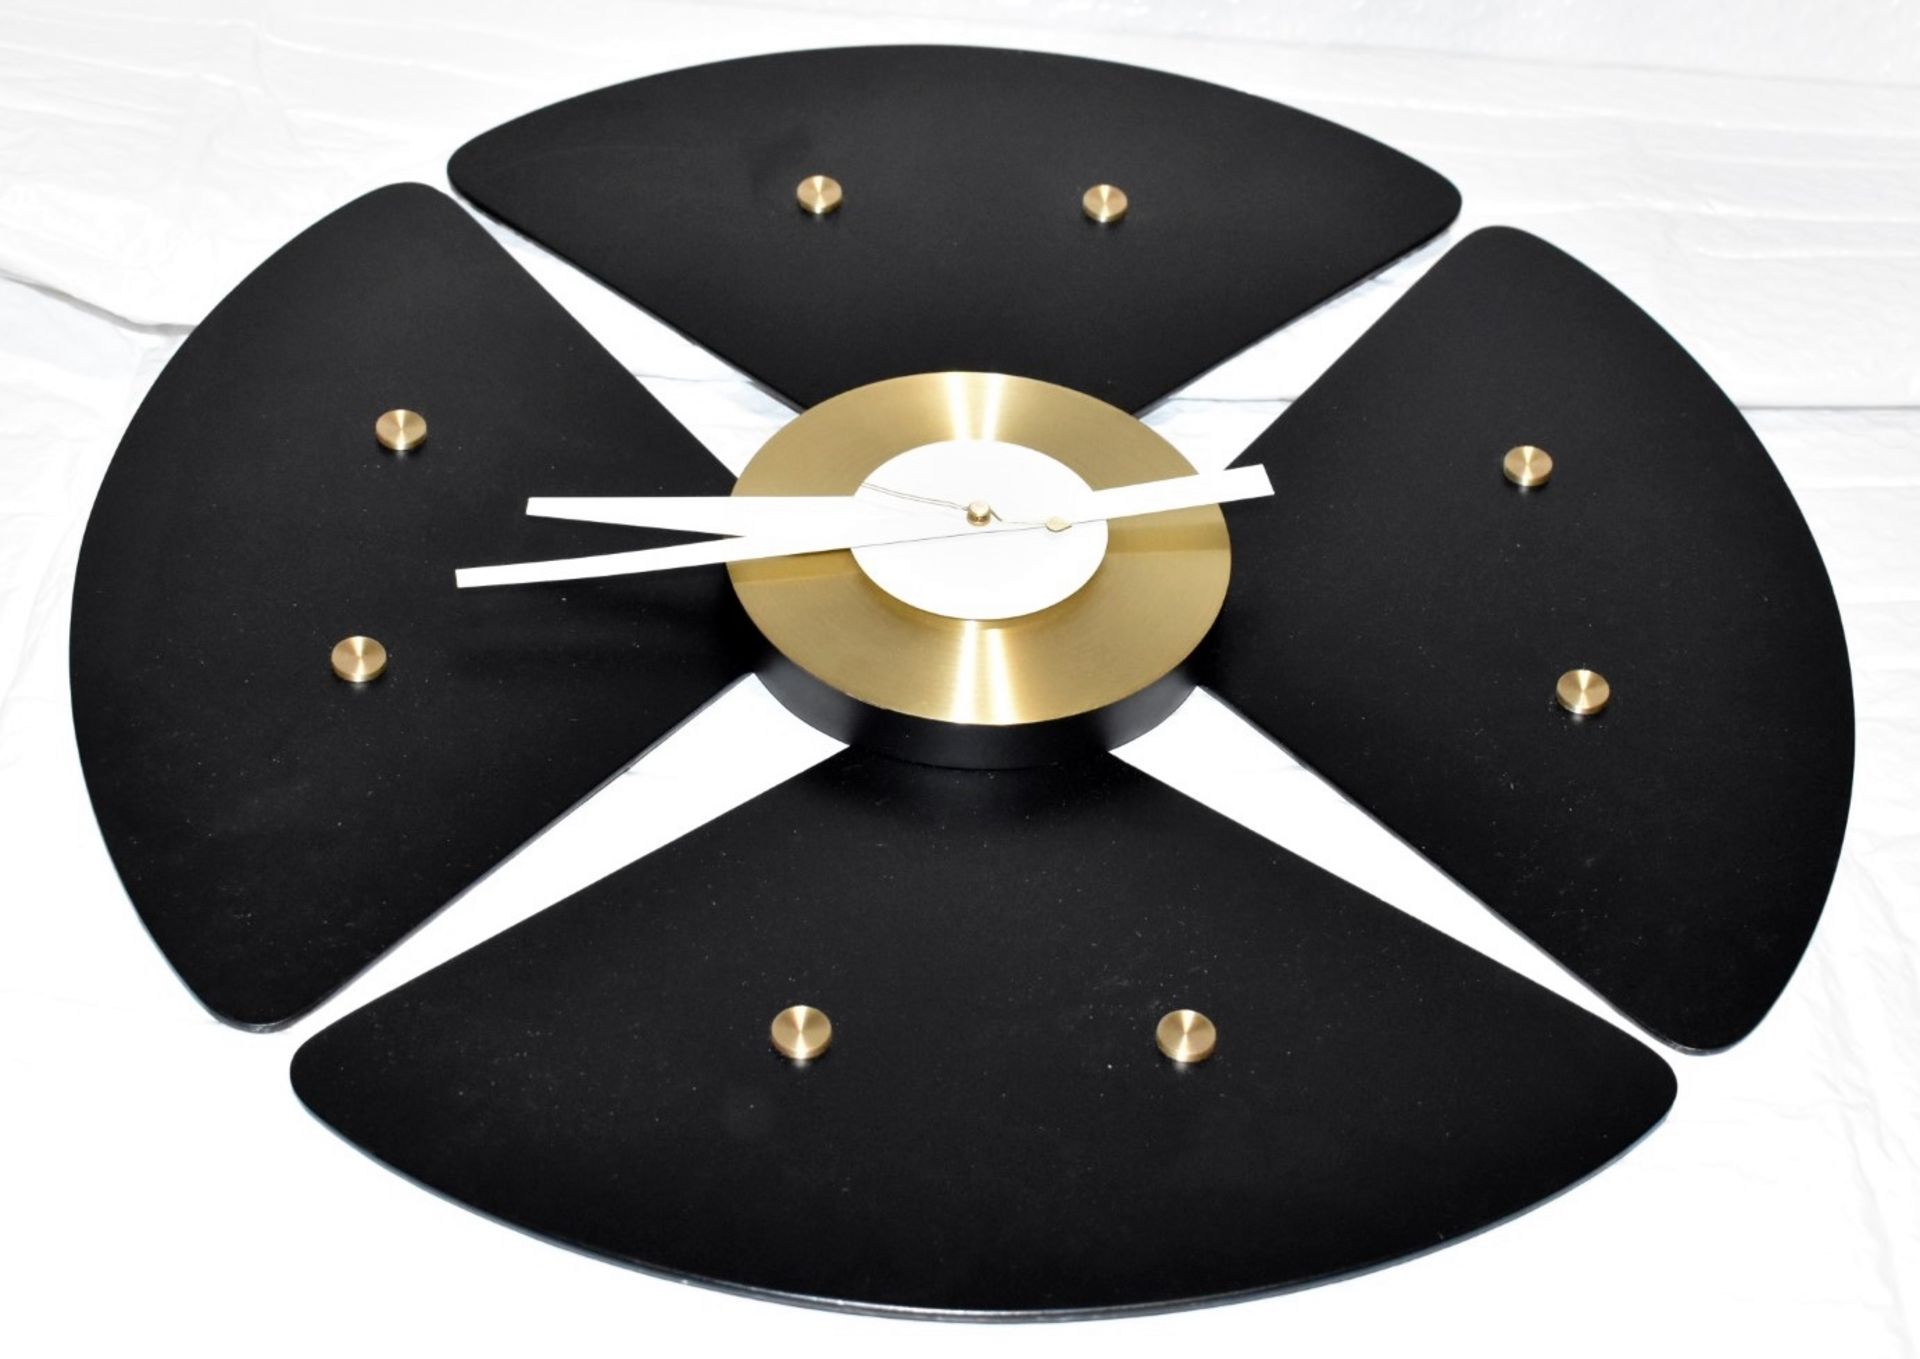 1 x VITRA George Nelson 'Petal' Designer Wall Clock in Black and Brass - Original Price £389.00 - Image 2 of 5